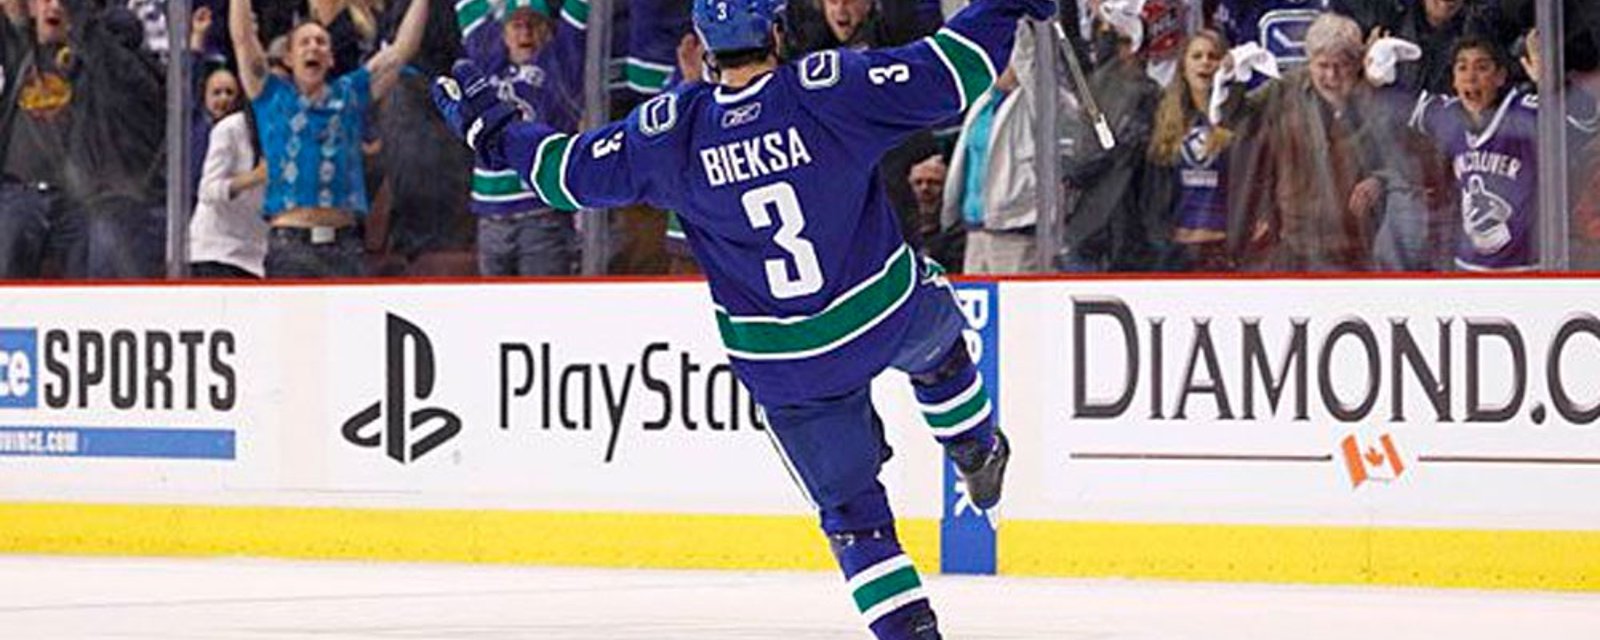 Bieksa signs a one day contract with the Canucks